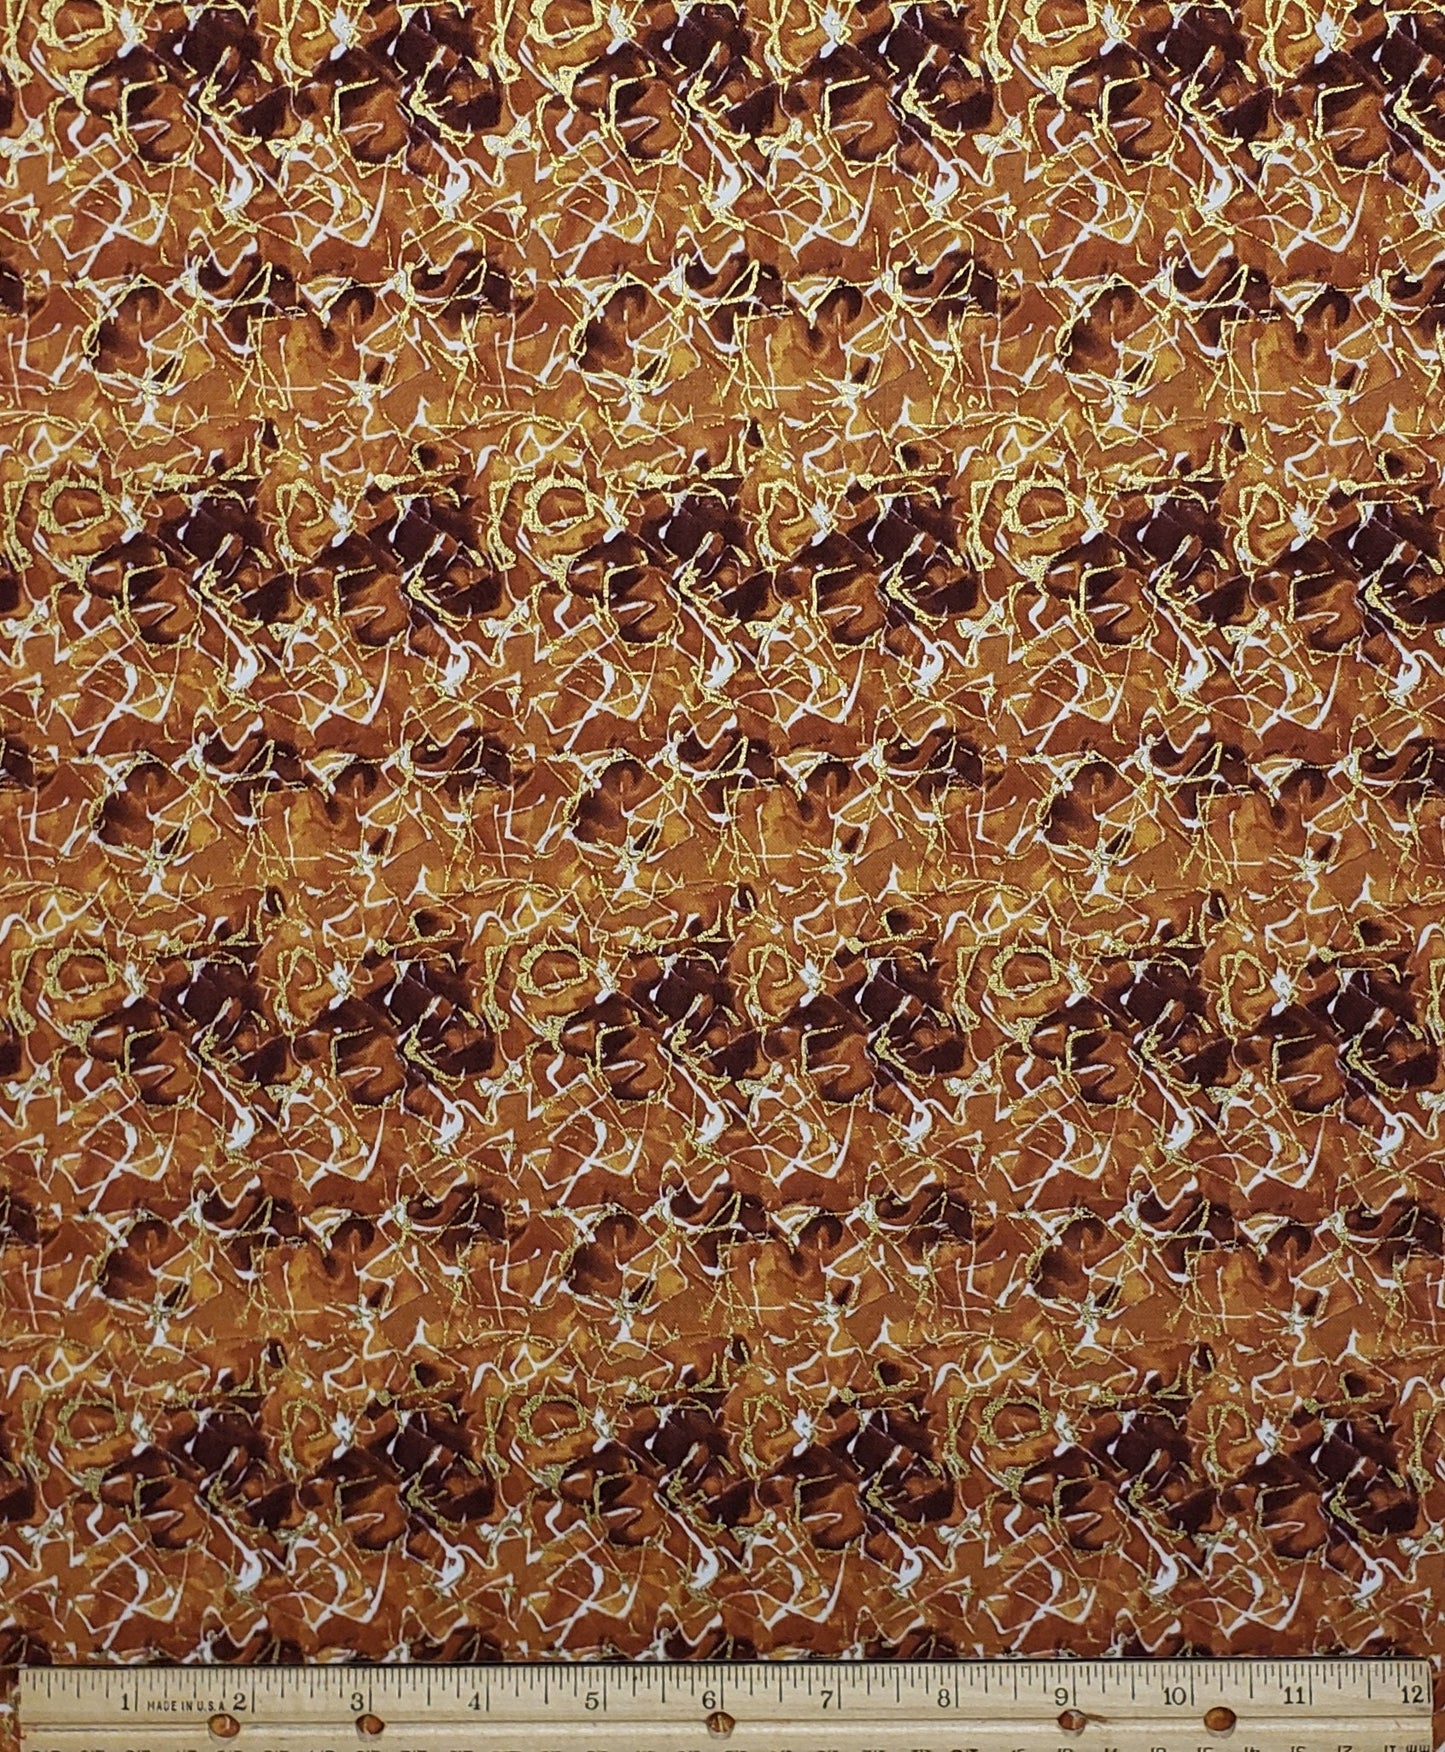 Moon Flowers by Pamela Mostek for Clothworks - Multi-Tone Brown Print Fabric with Metallic Gold Pattern